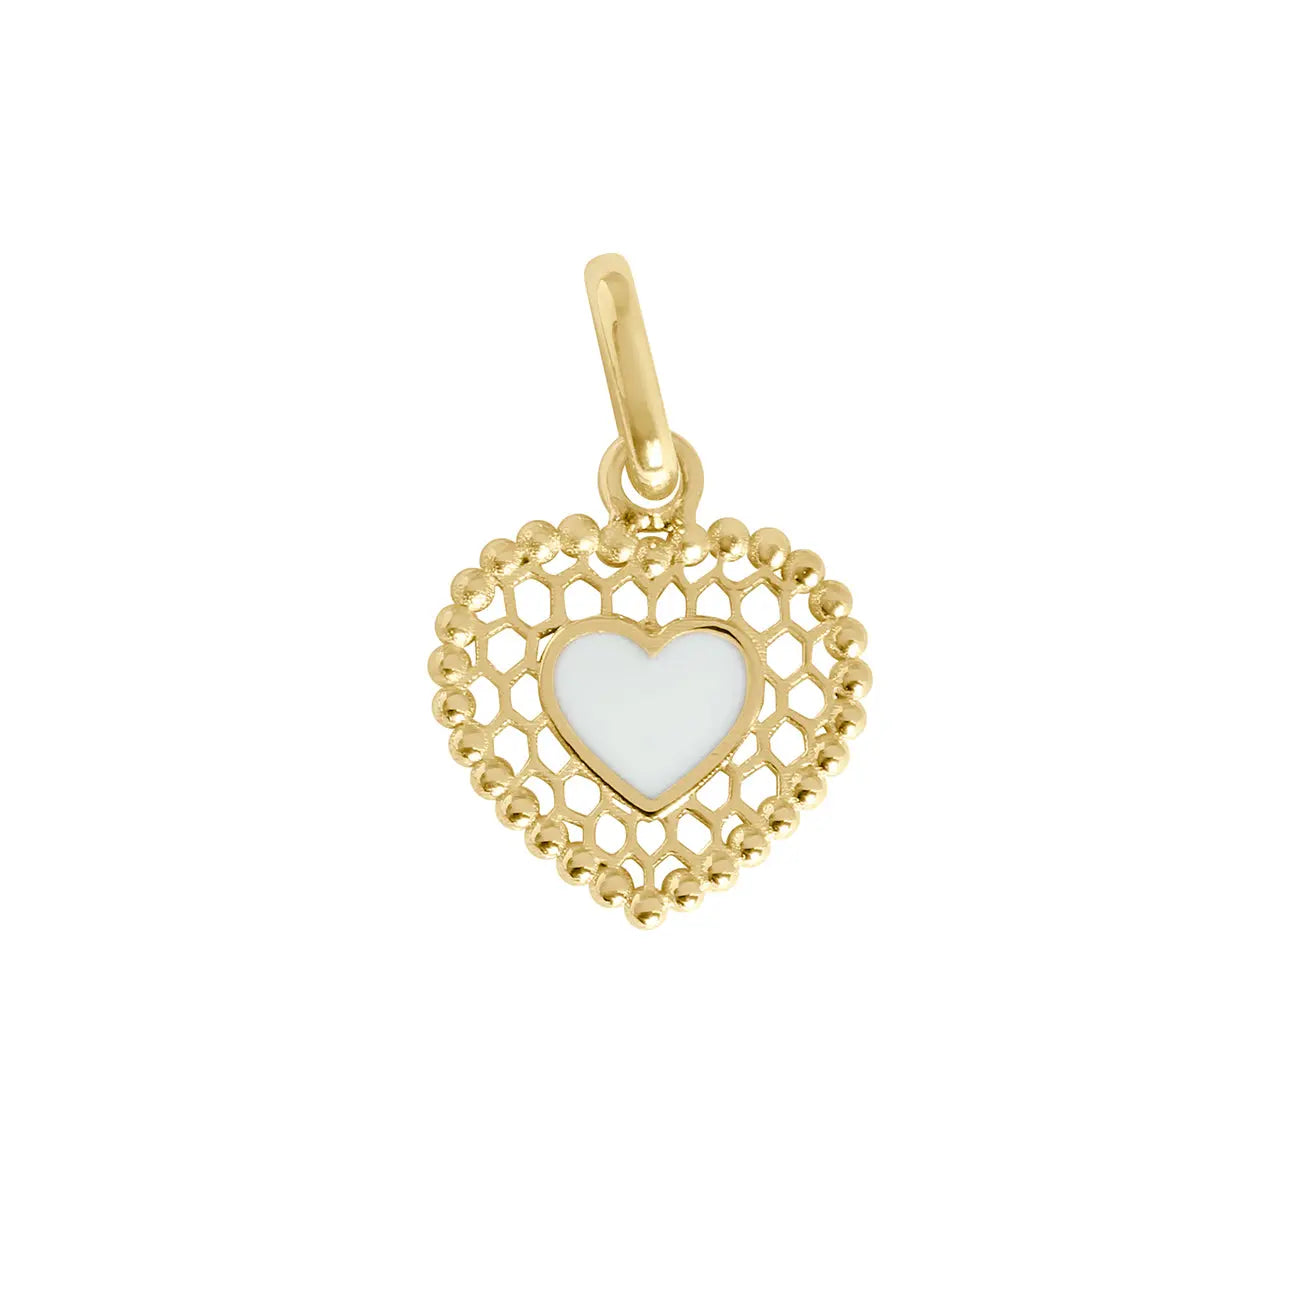 The spirit of Rock paired with a tender heart. The "Lace Heart" is breaking the rules. A tad bit of delicacy and a lot of character! Each jewel is unique, artisanally made in its family-owned workshop. The pendant is 18k yellow gold and resin. The pendant measures 0.35" (with bail 0.59"), Pendant sold without chain.